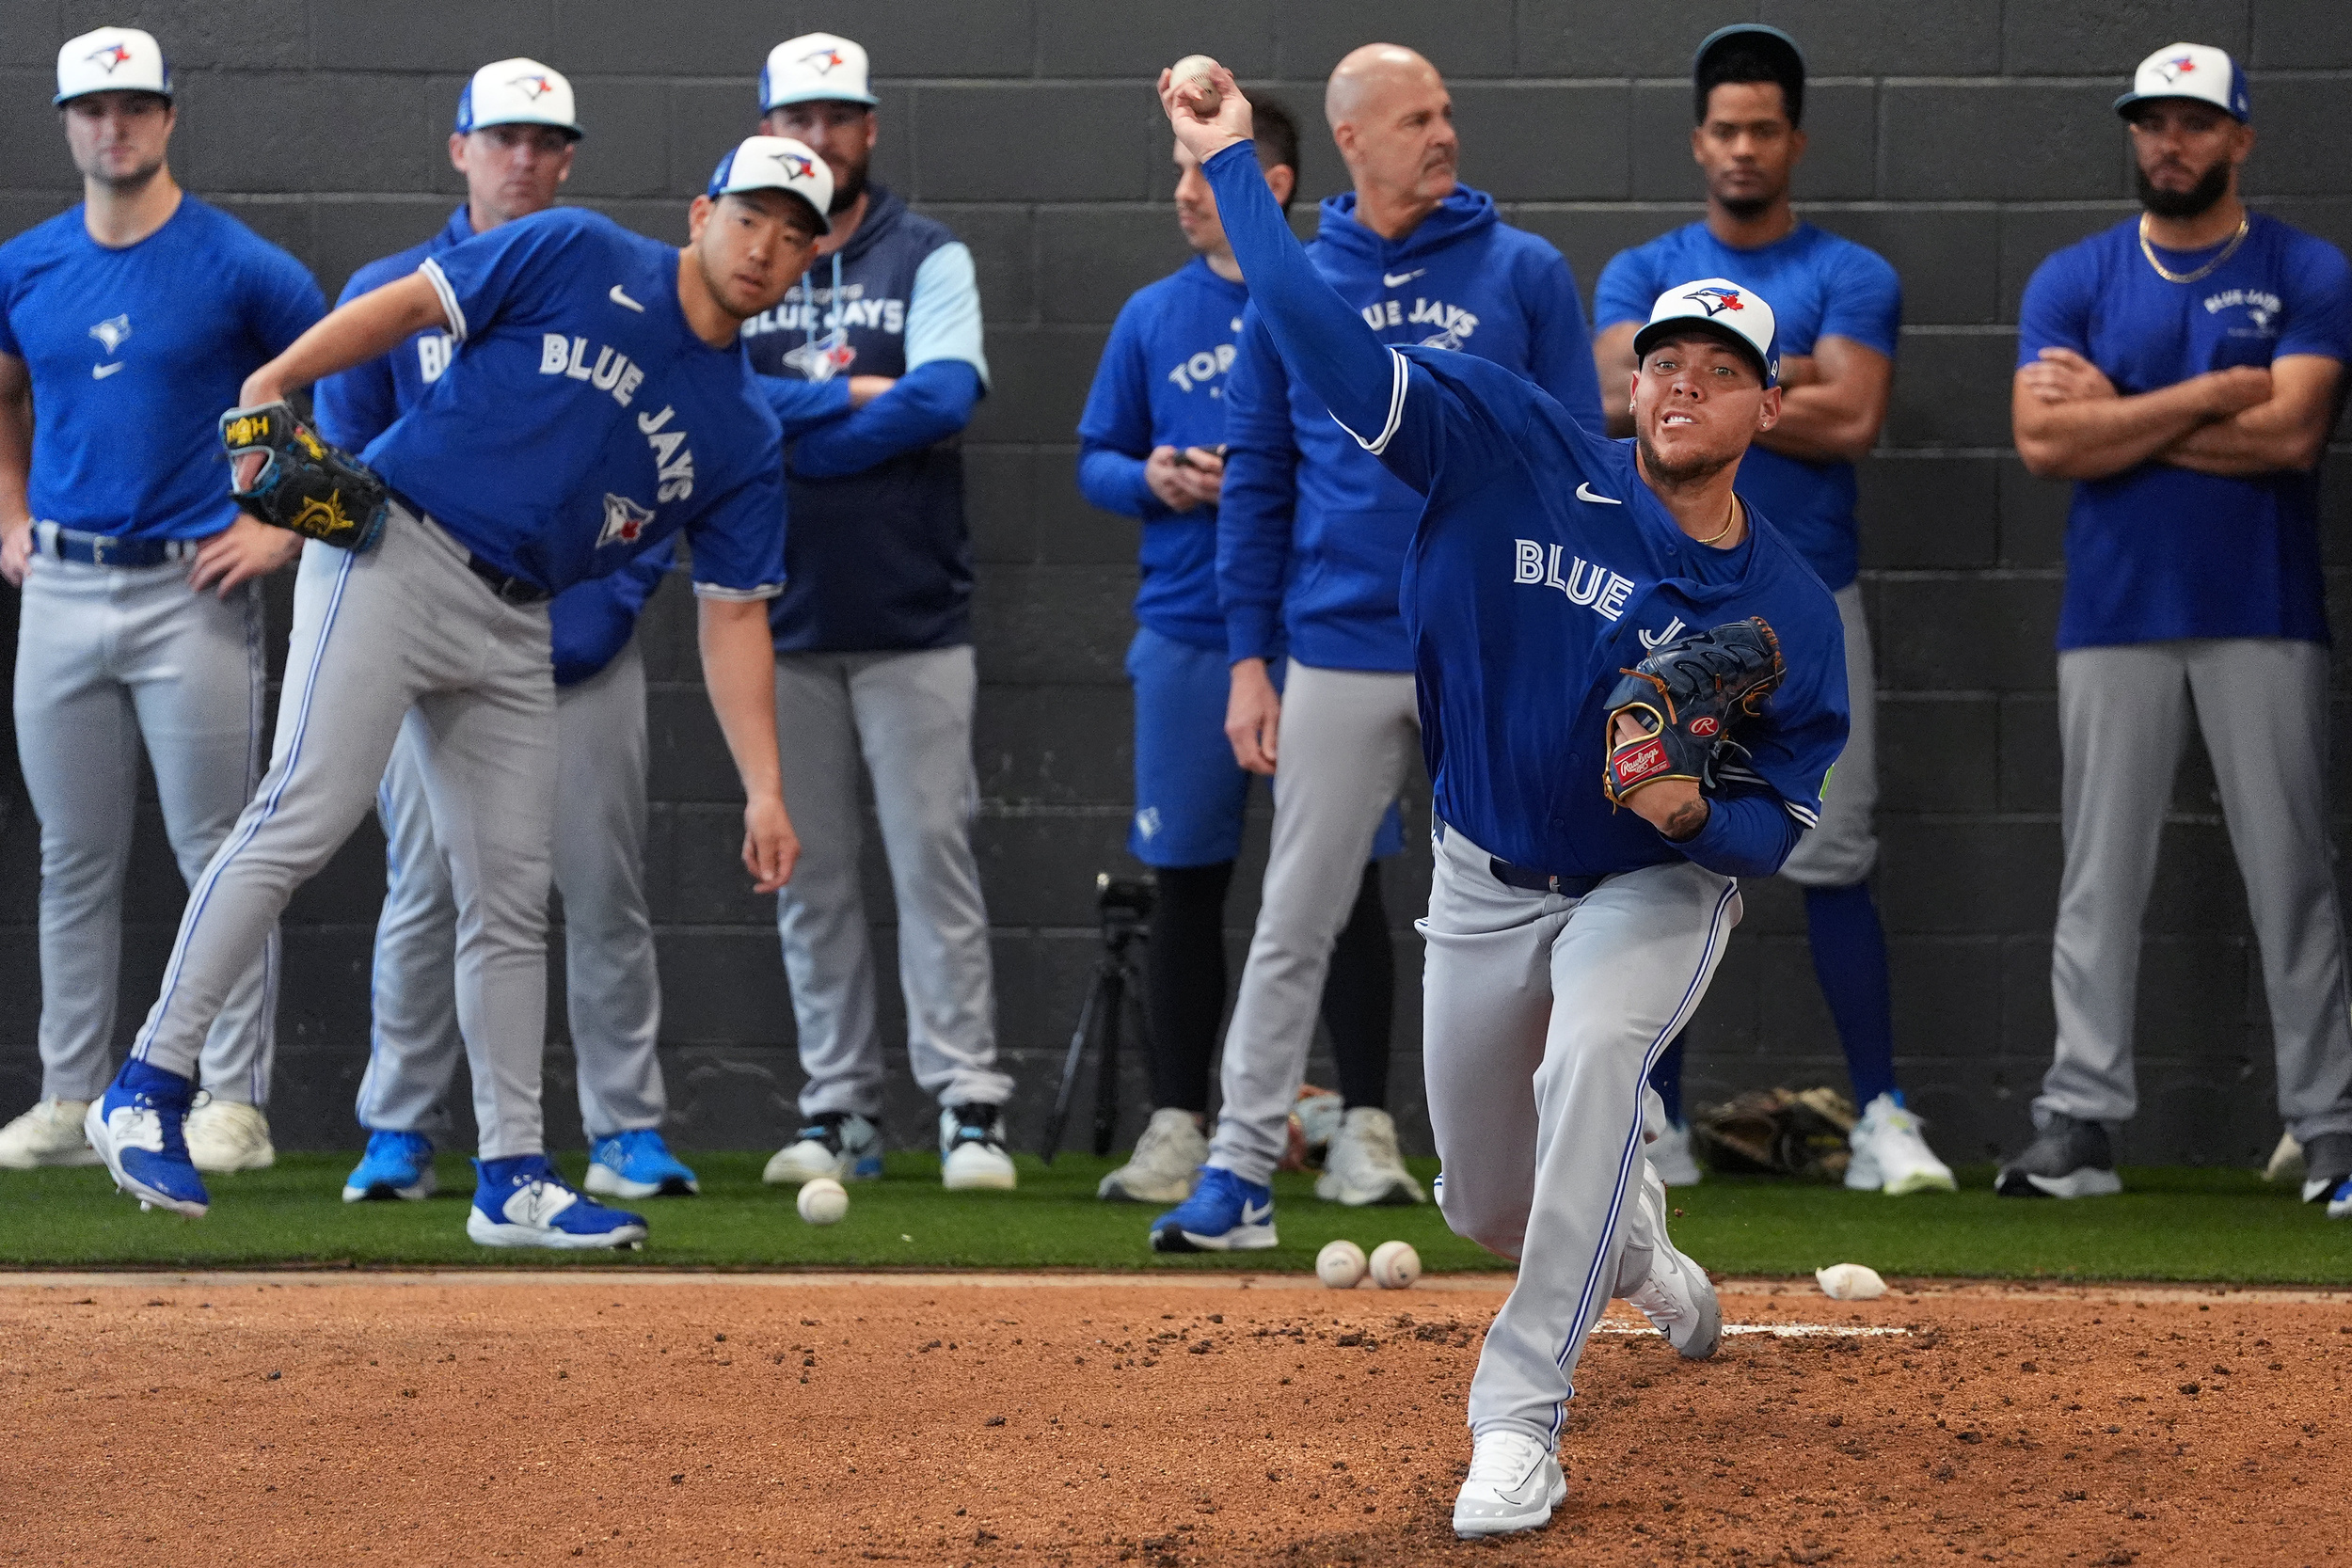 blue jays option pitcher, but he could be back soon